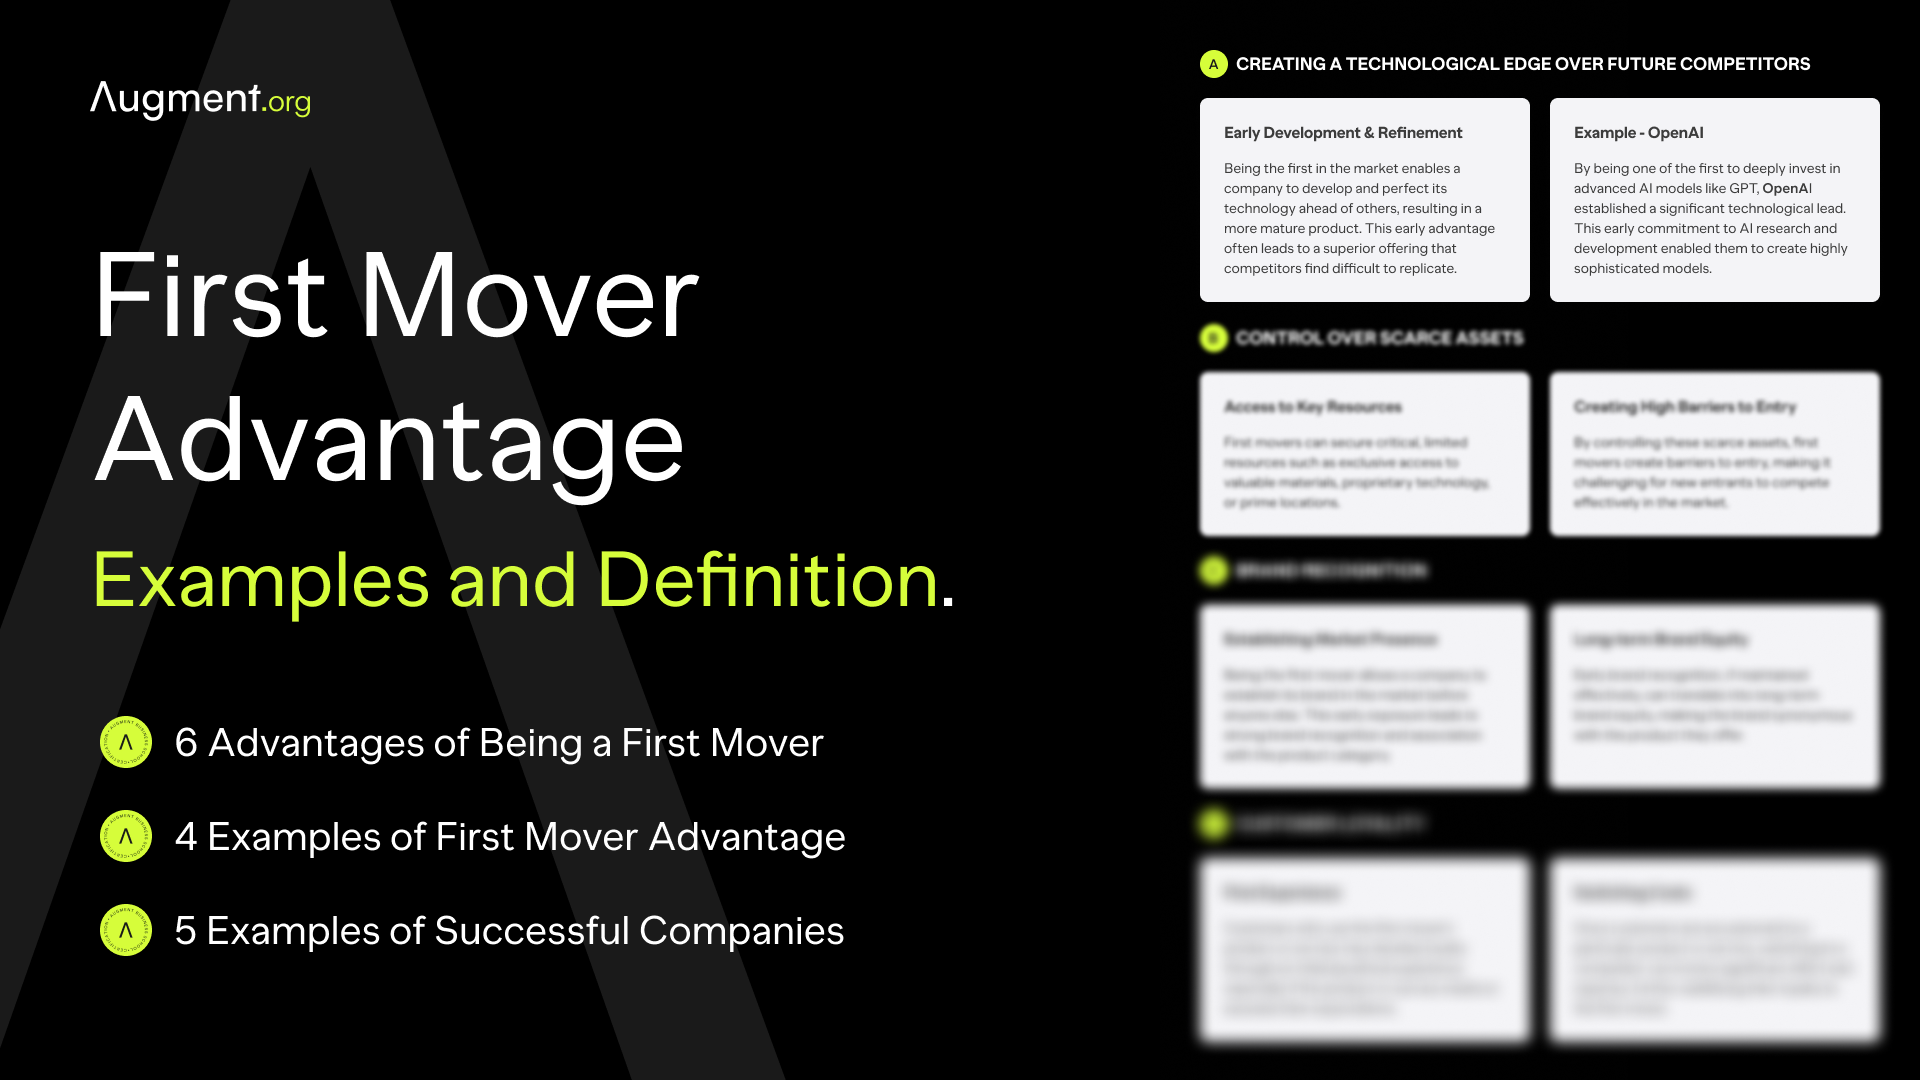 First Mover Advantage: Examples and Definition